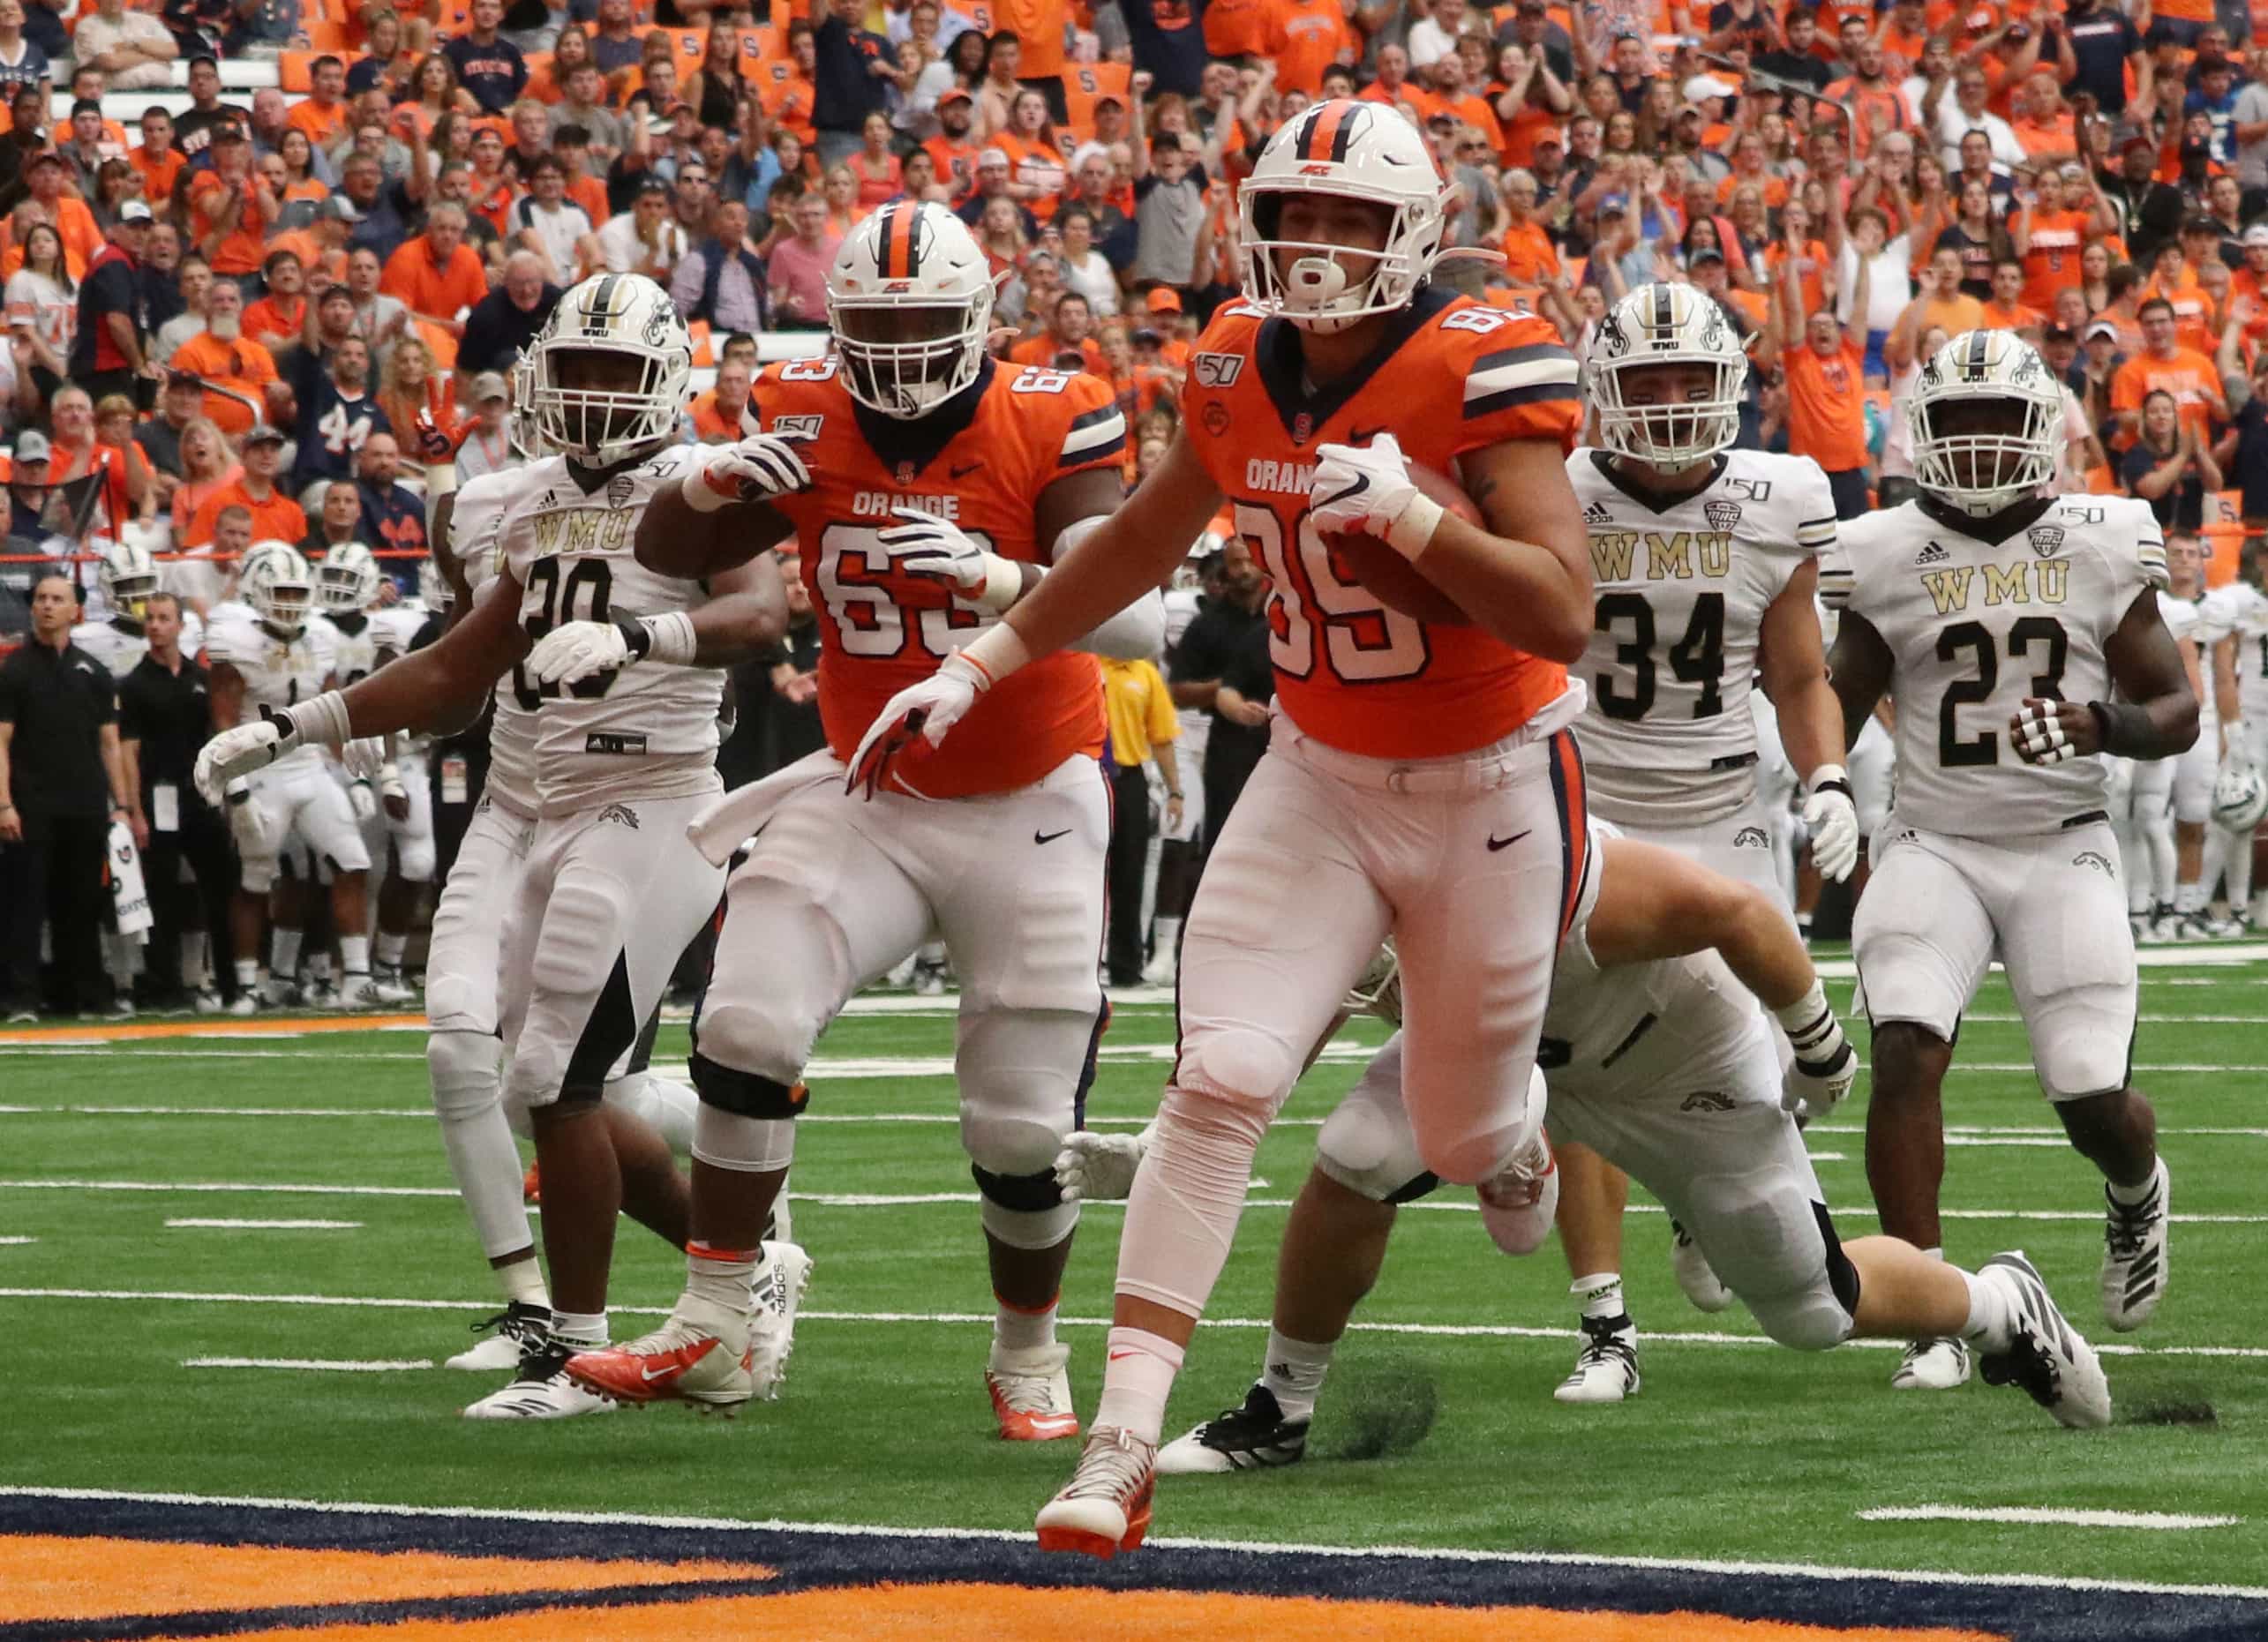 Syracuse University’s tight end Aaron Hackett (89), pushes through Western Michigan University’s defense for a touchdown. Syracuse University beat Western Michigan University with a score of 52-33.